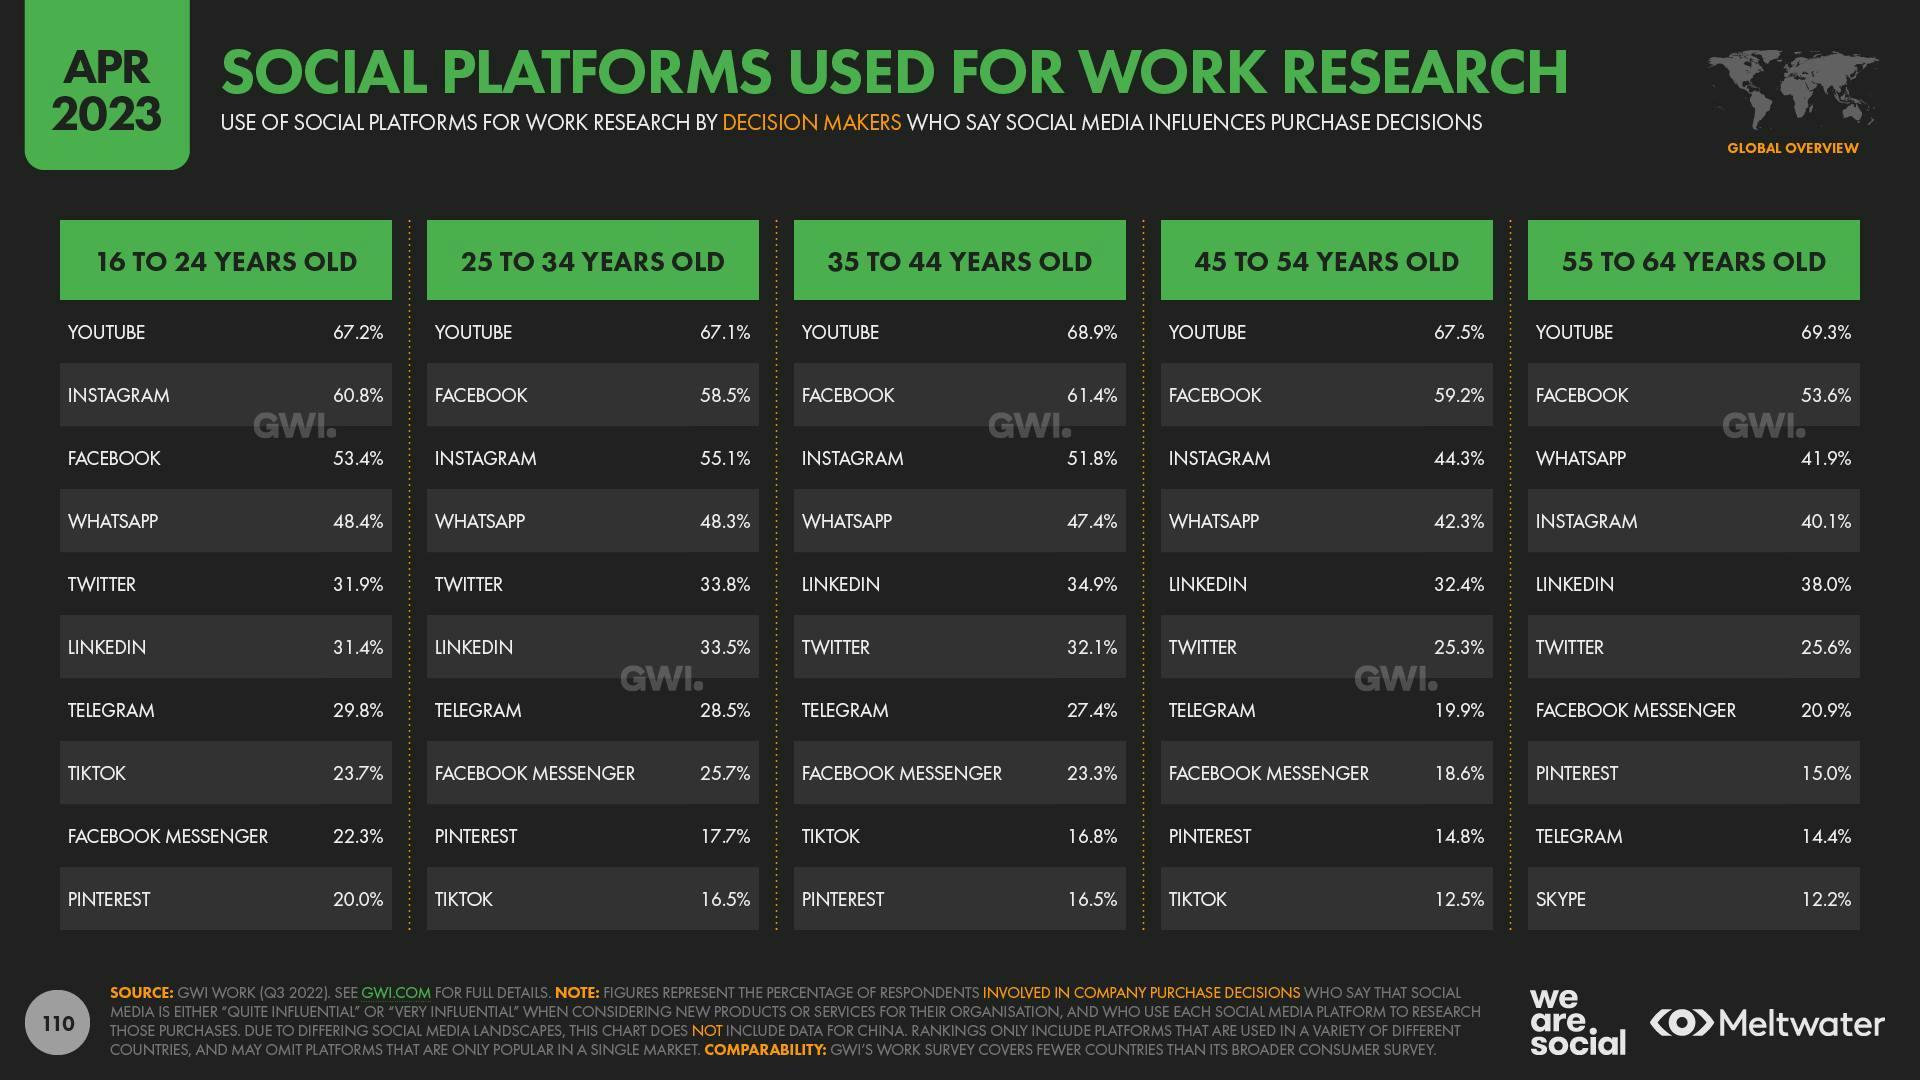 April 2023 Global State of Digital Report: Social Platforms Used for Work Research